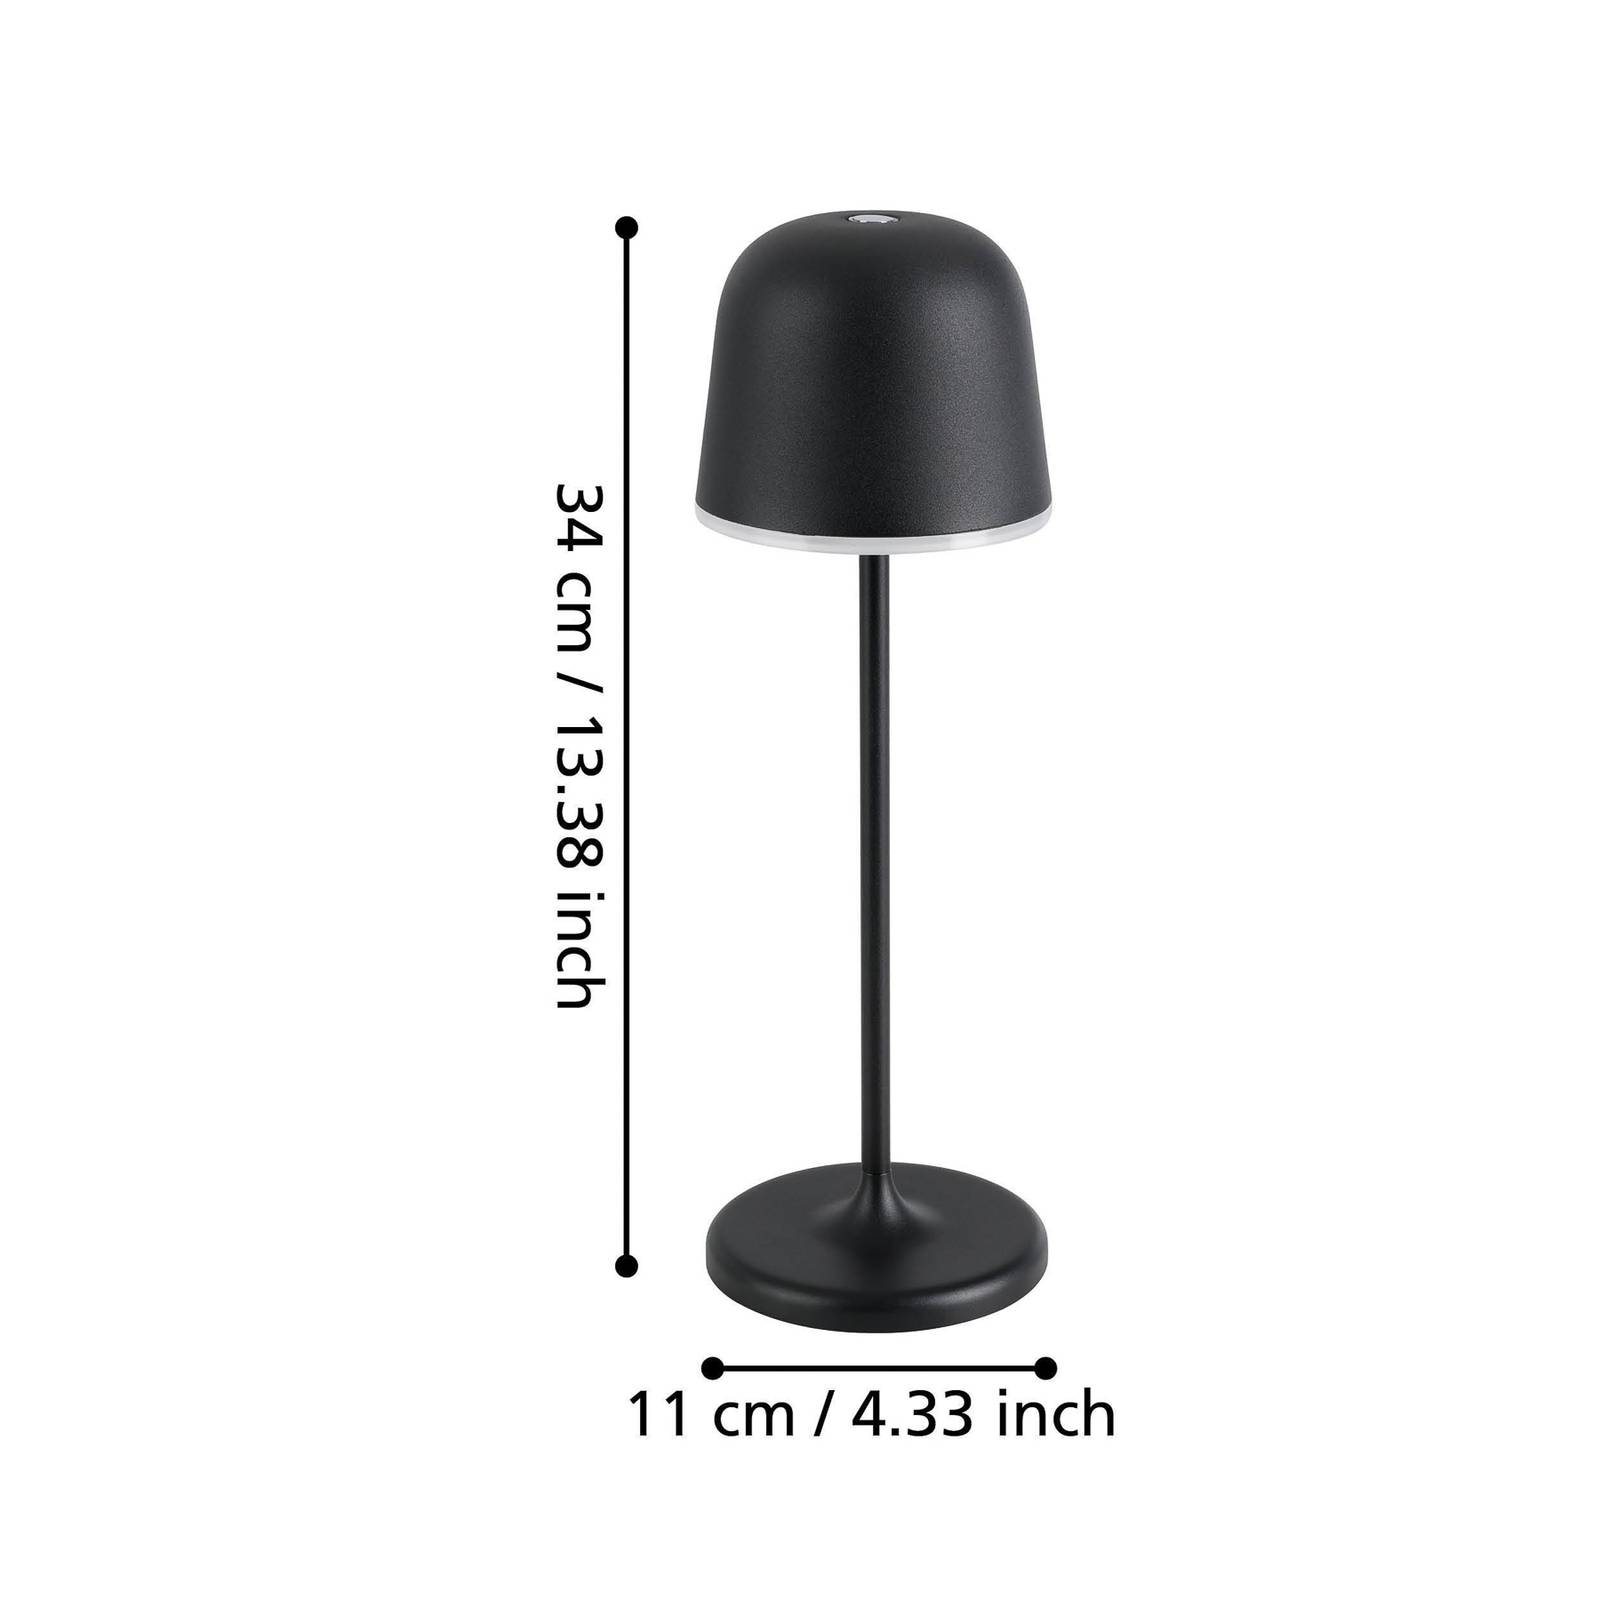 EGLO Mannera LED table lamp with a battery, black